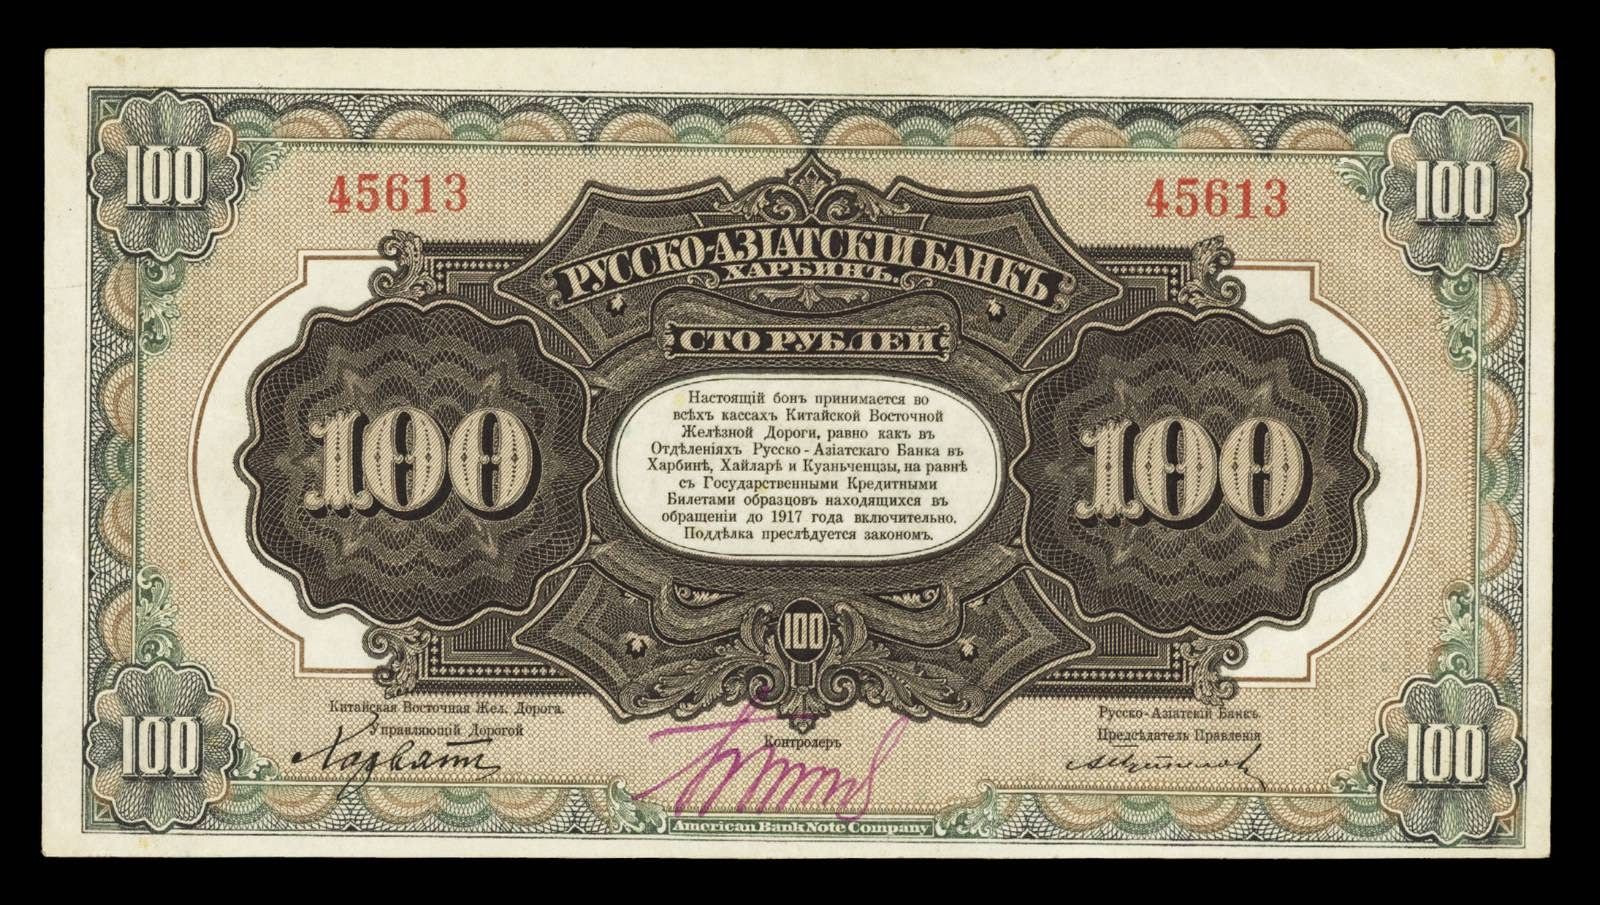 China Russo Asiatic Bank 100 Rubles banknote 1917 Harbin